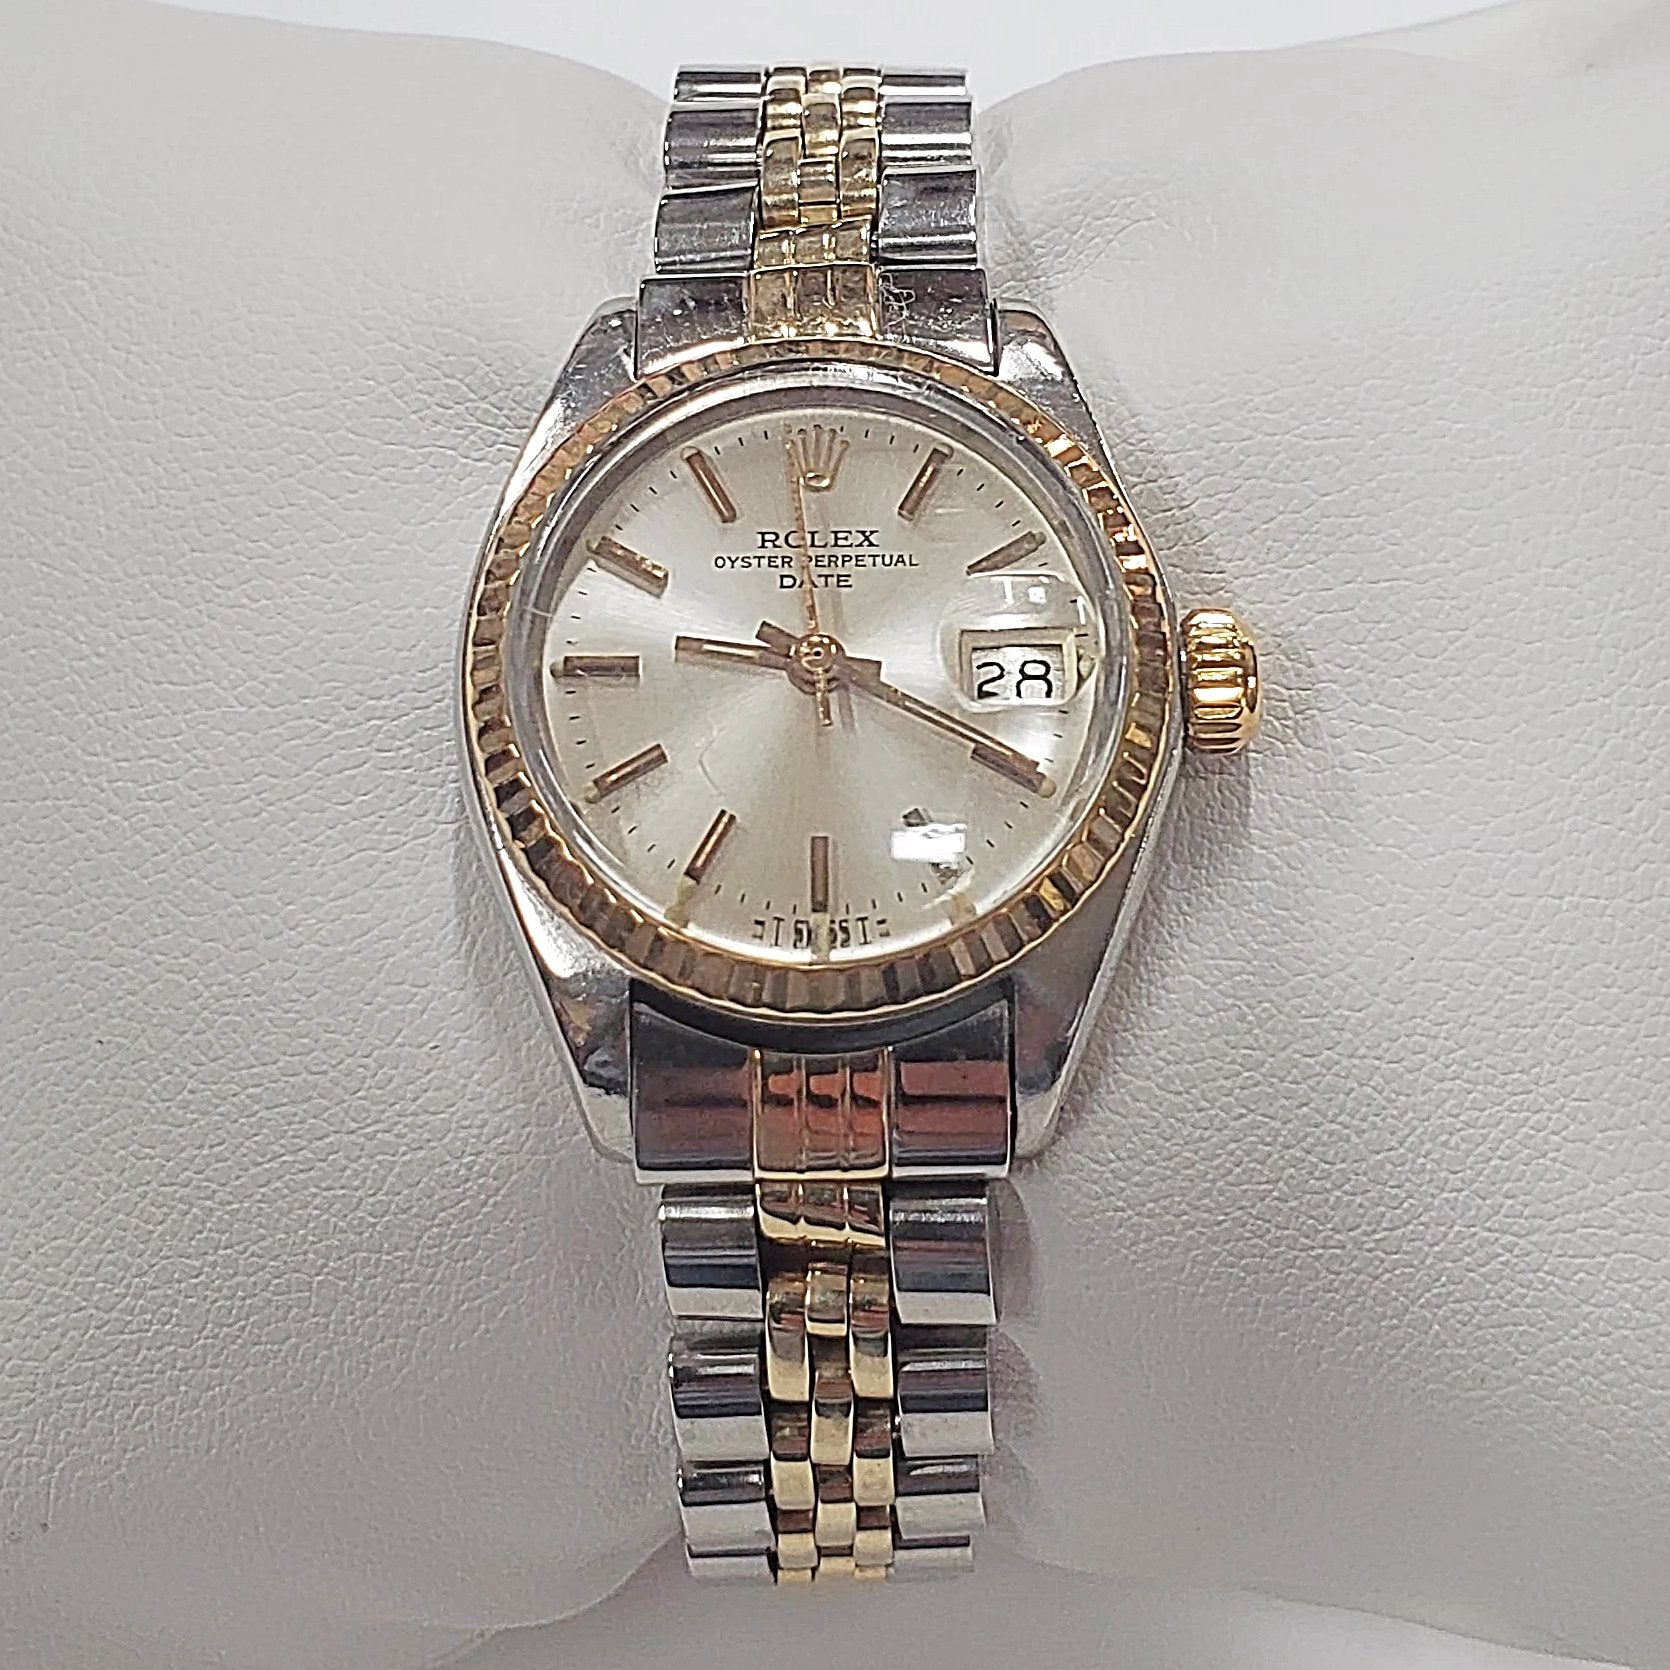 Women's Two-Tone Rolex Watch 26mm DateJust 14K Gold Watch, with Silver Dial, and 14k Fluted Bezel.